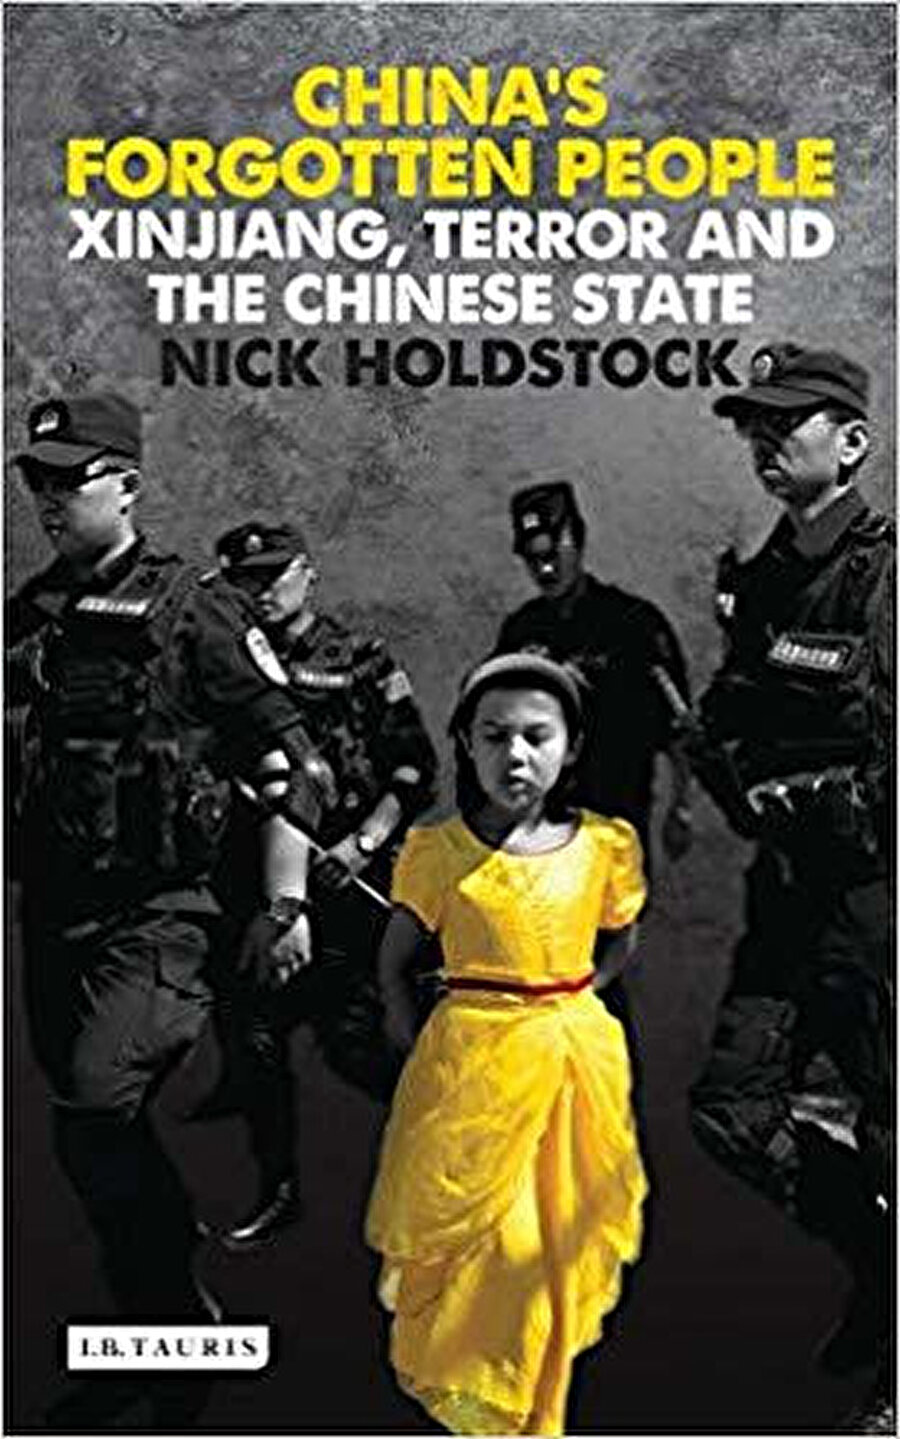  China’s Forgotten People: Xinjiang, Terror and the Chinese State, Nick Holdstock, I.B. Tauris